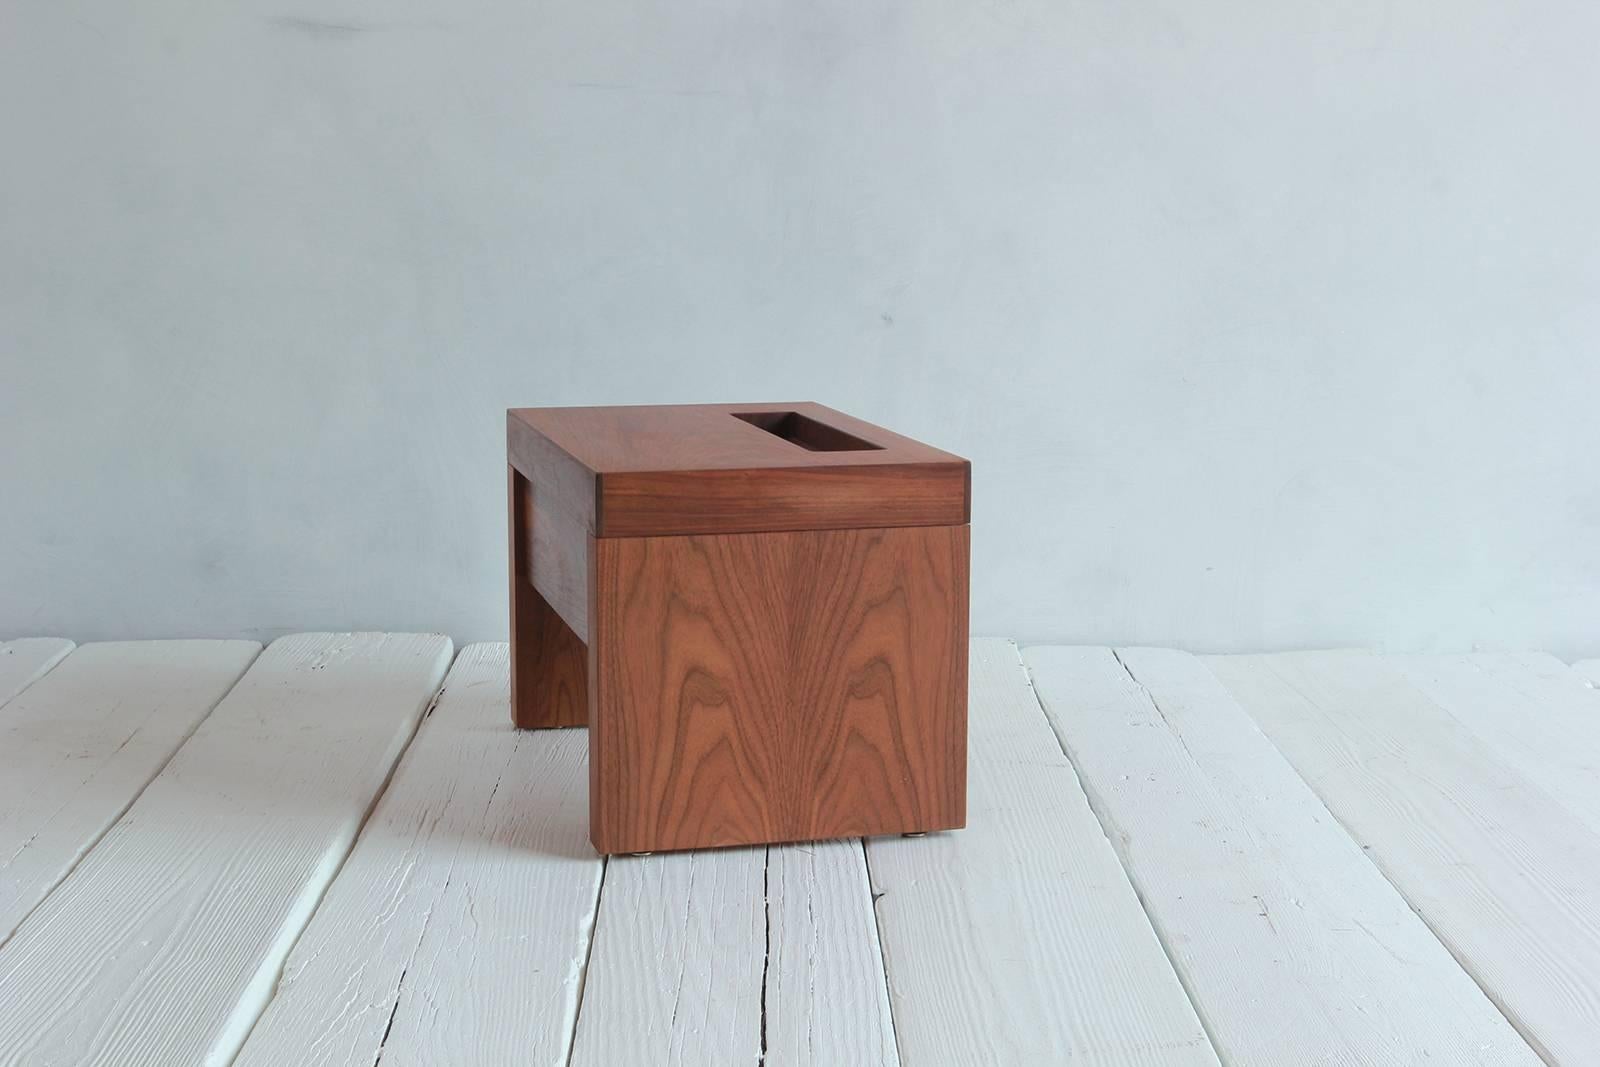 Walnut side table with cut-out niche and hidden single drawer.